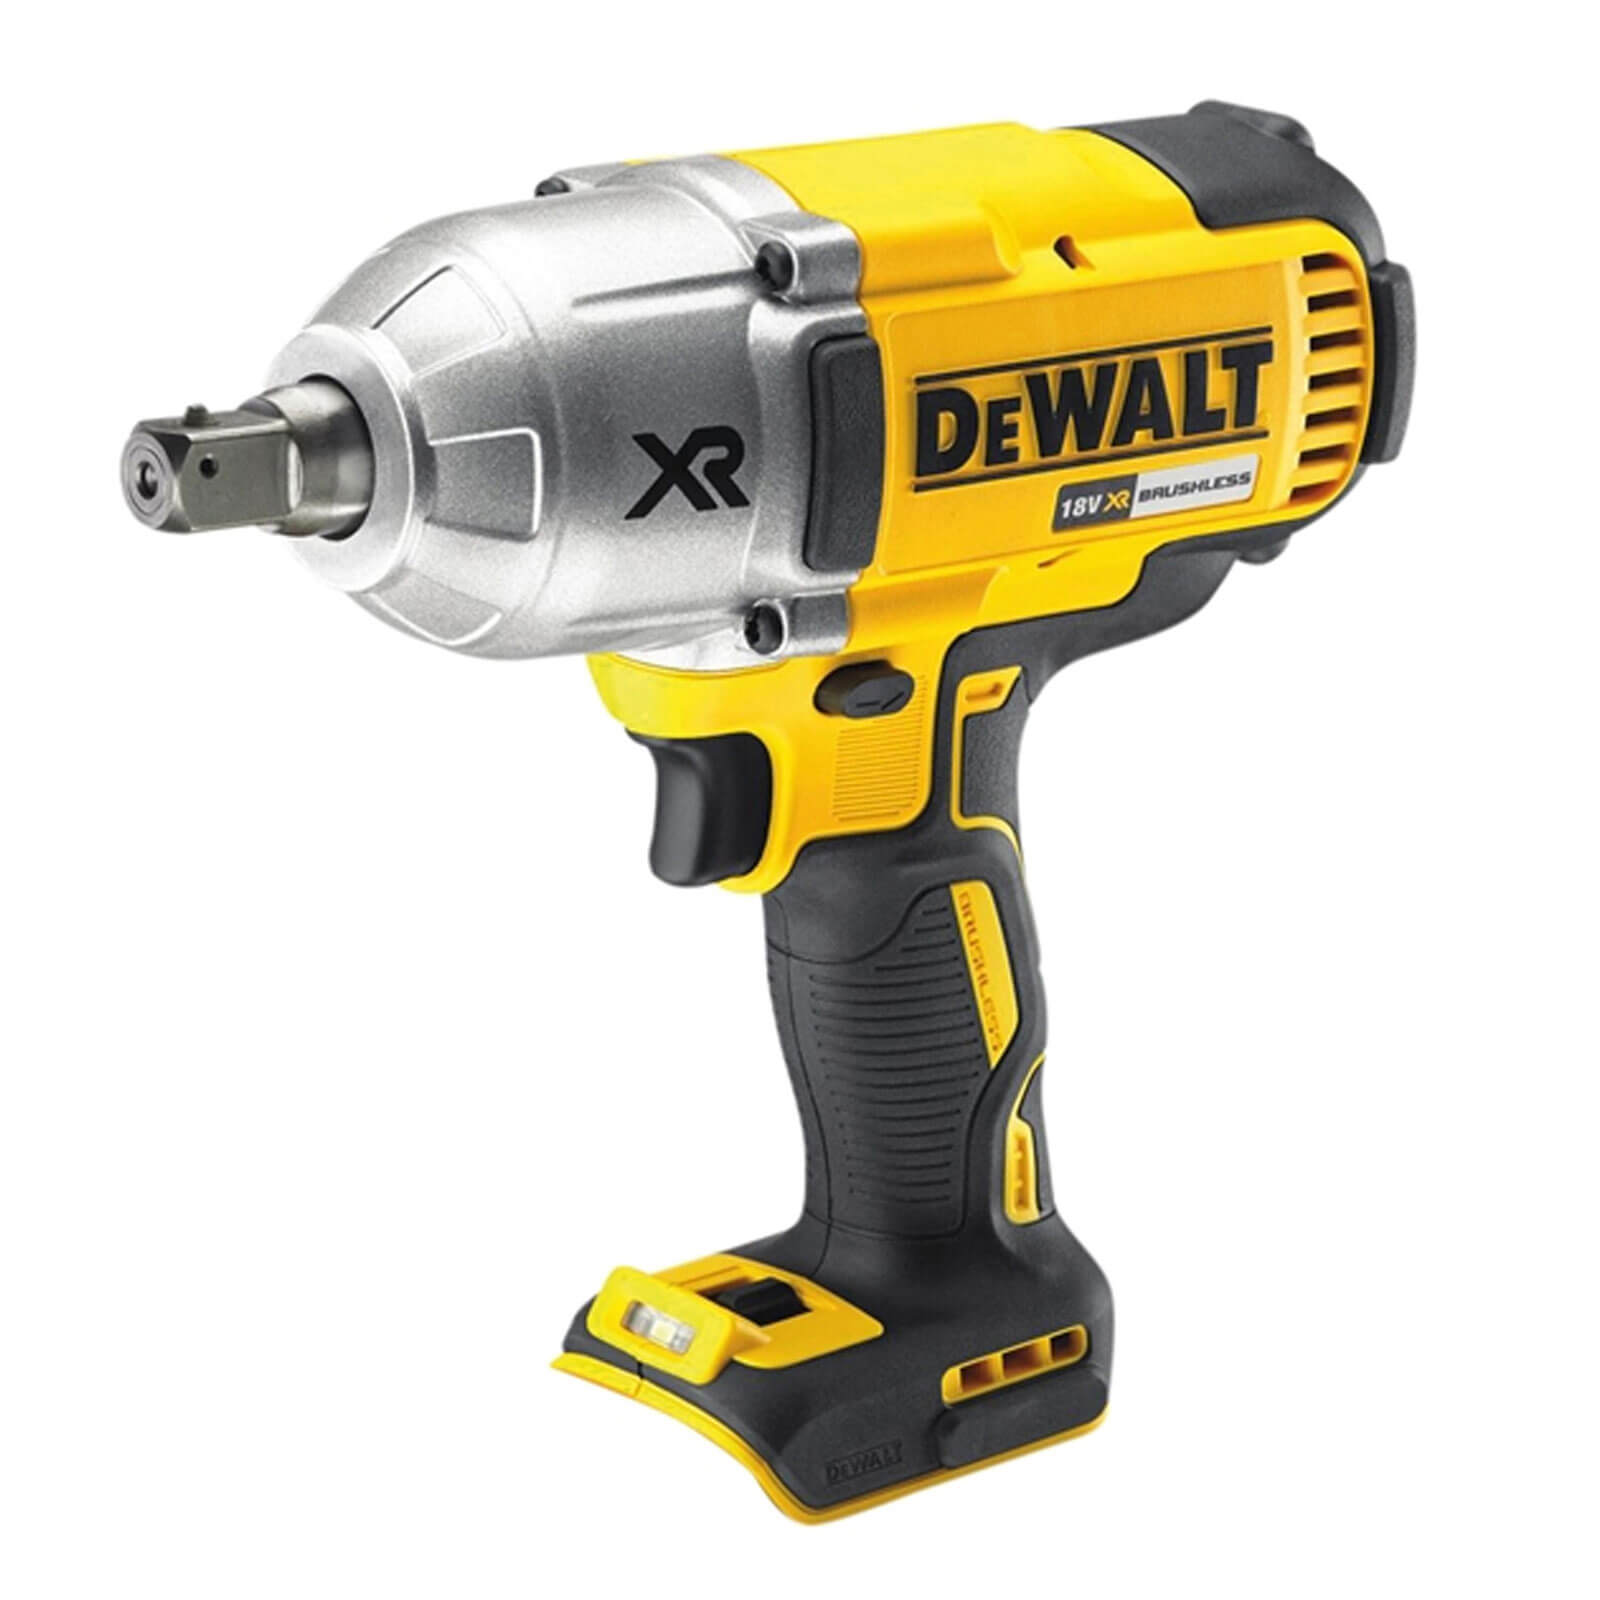 Image of DeWalt DCF899 18v XR Cordless Brushless 1/2" Drive Impact Wrench No Batteries No Charger No Case